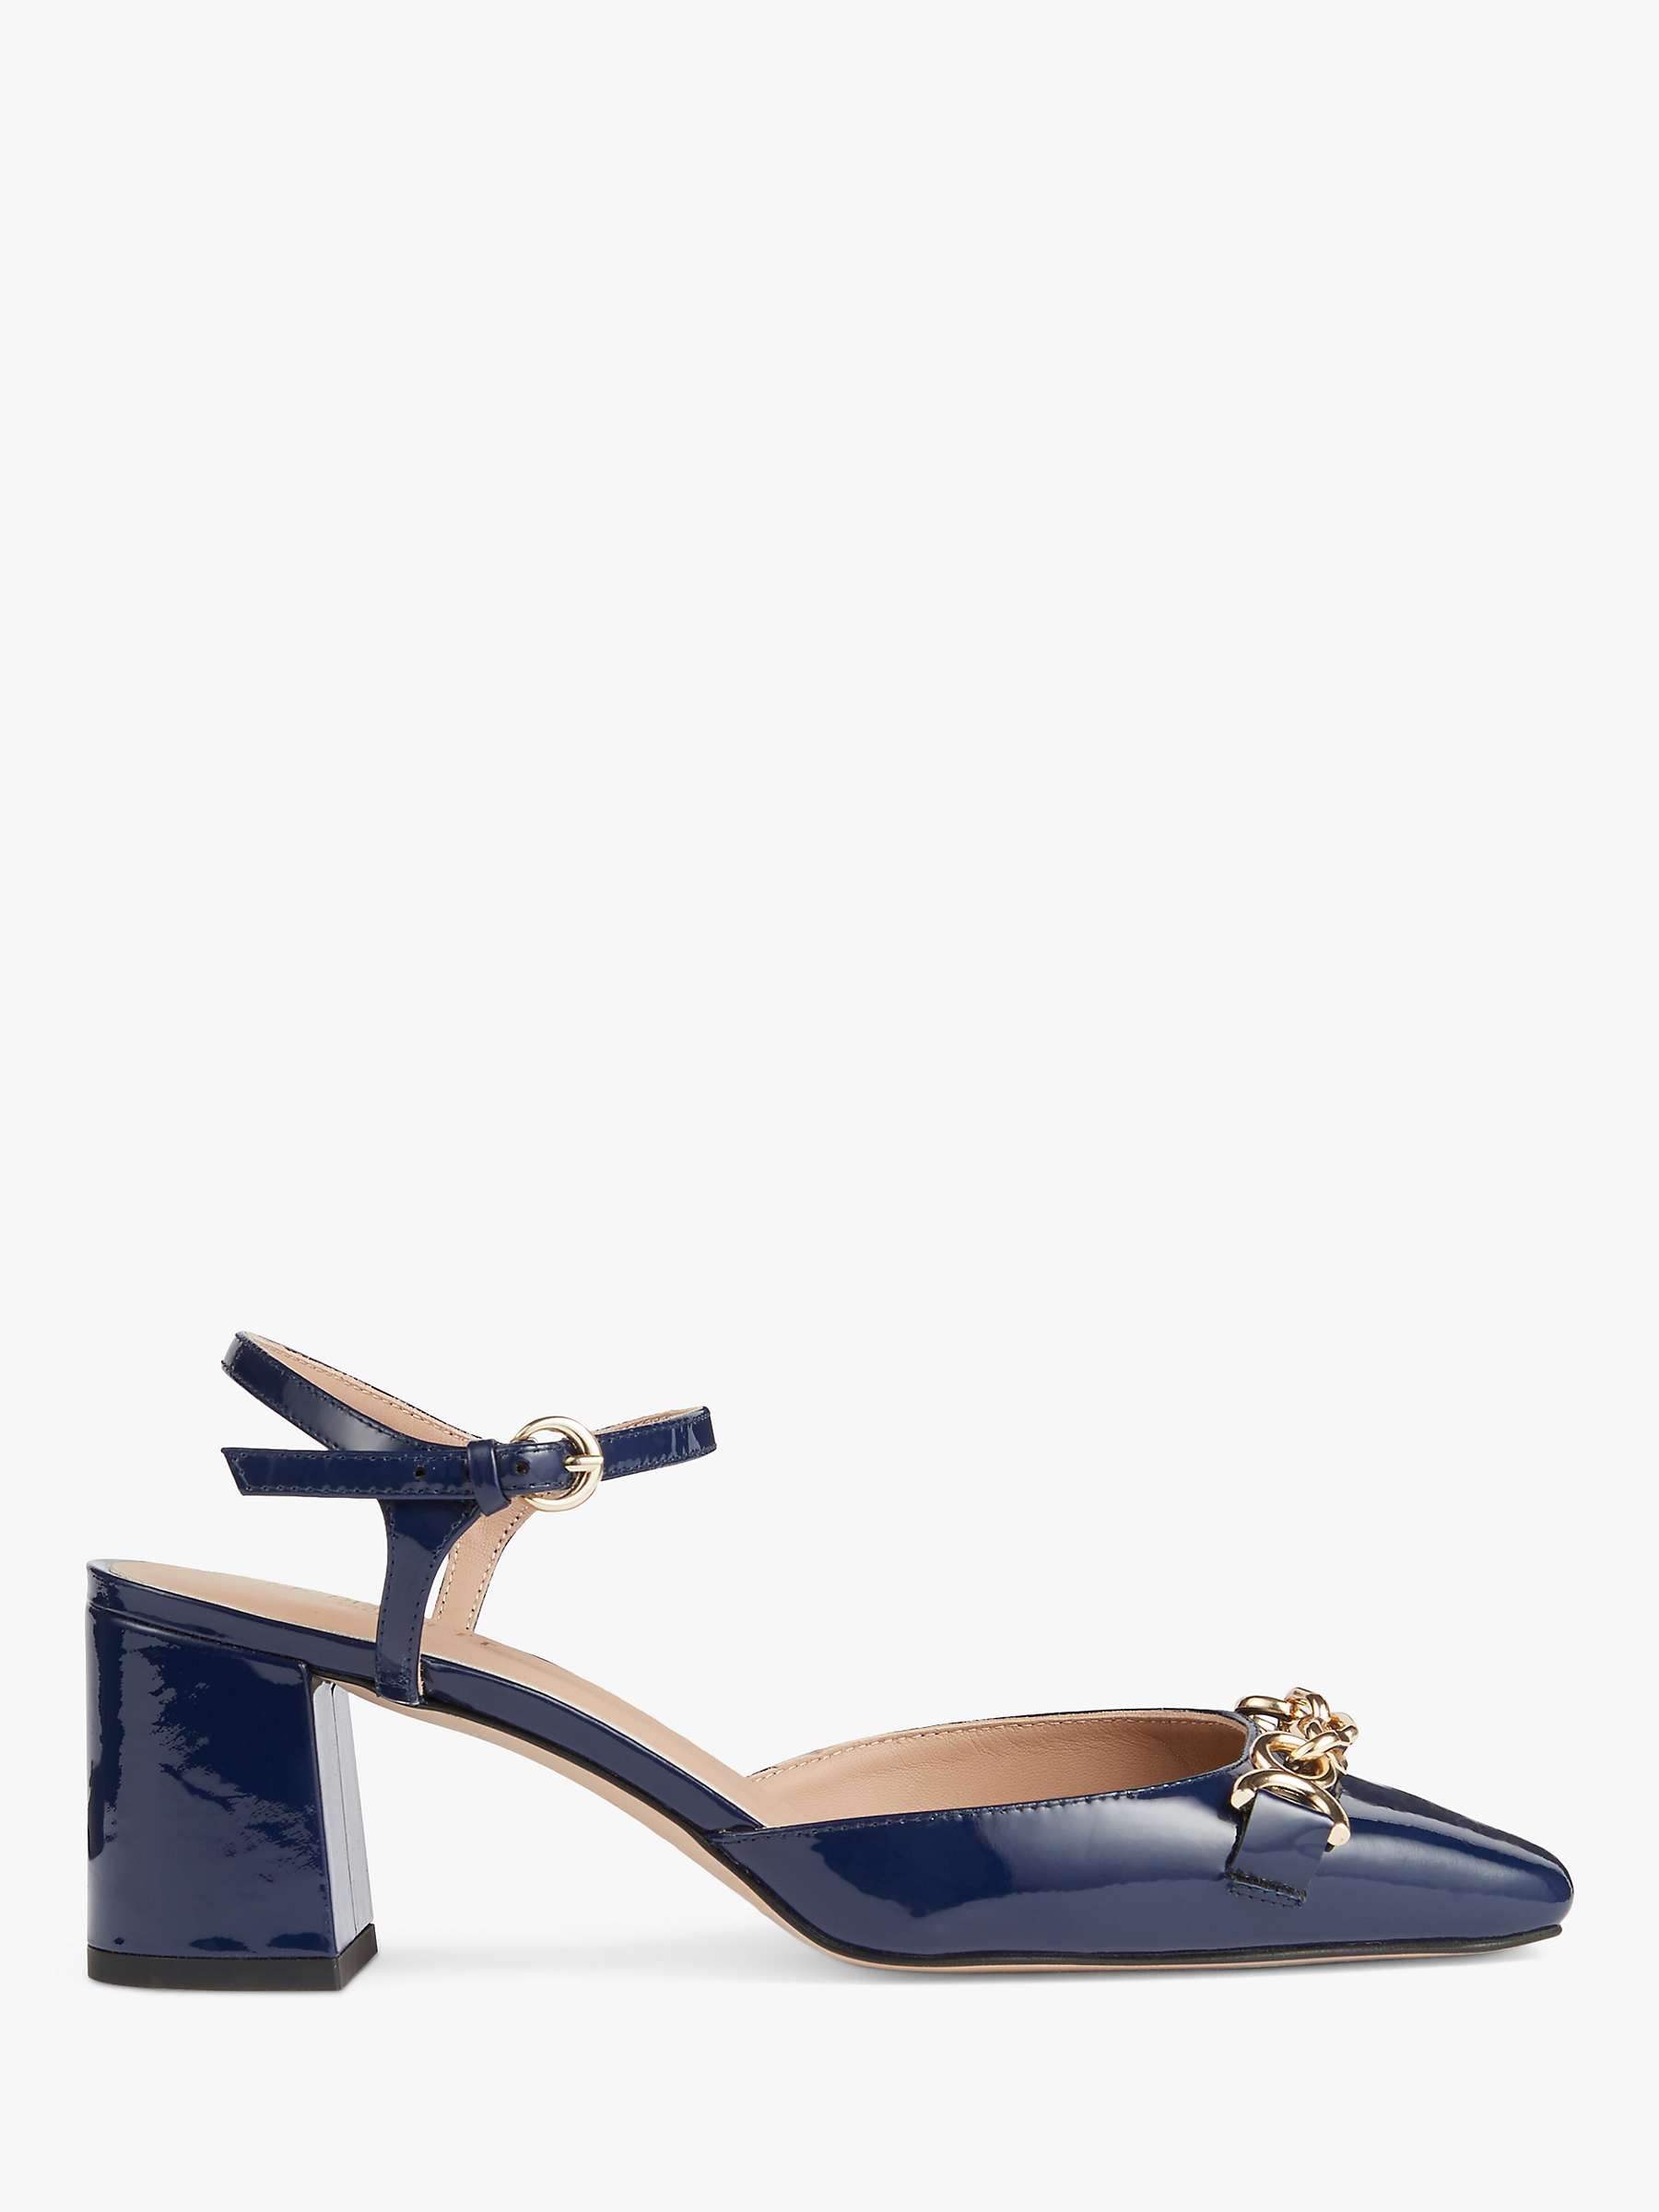 Buy L.K.Bennett Mindy Patent Leather Open Court Shoes, Navy Online at johnlewis.com